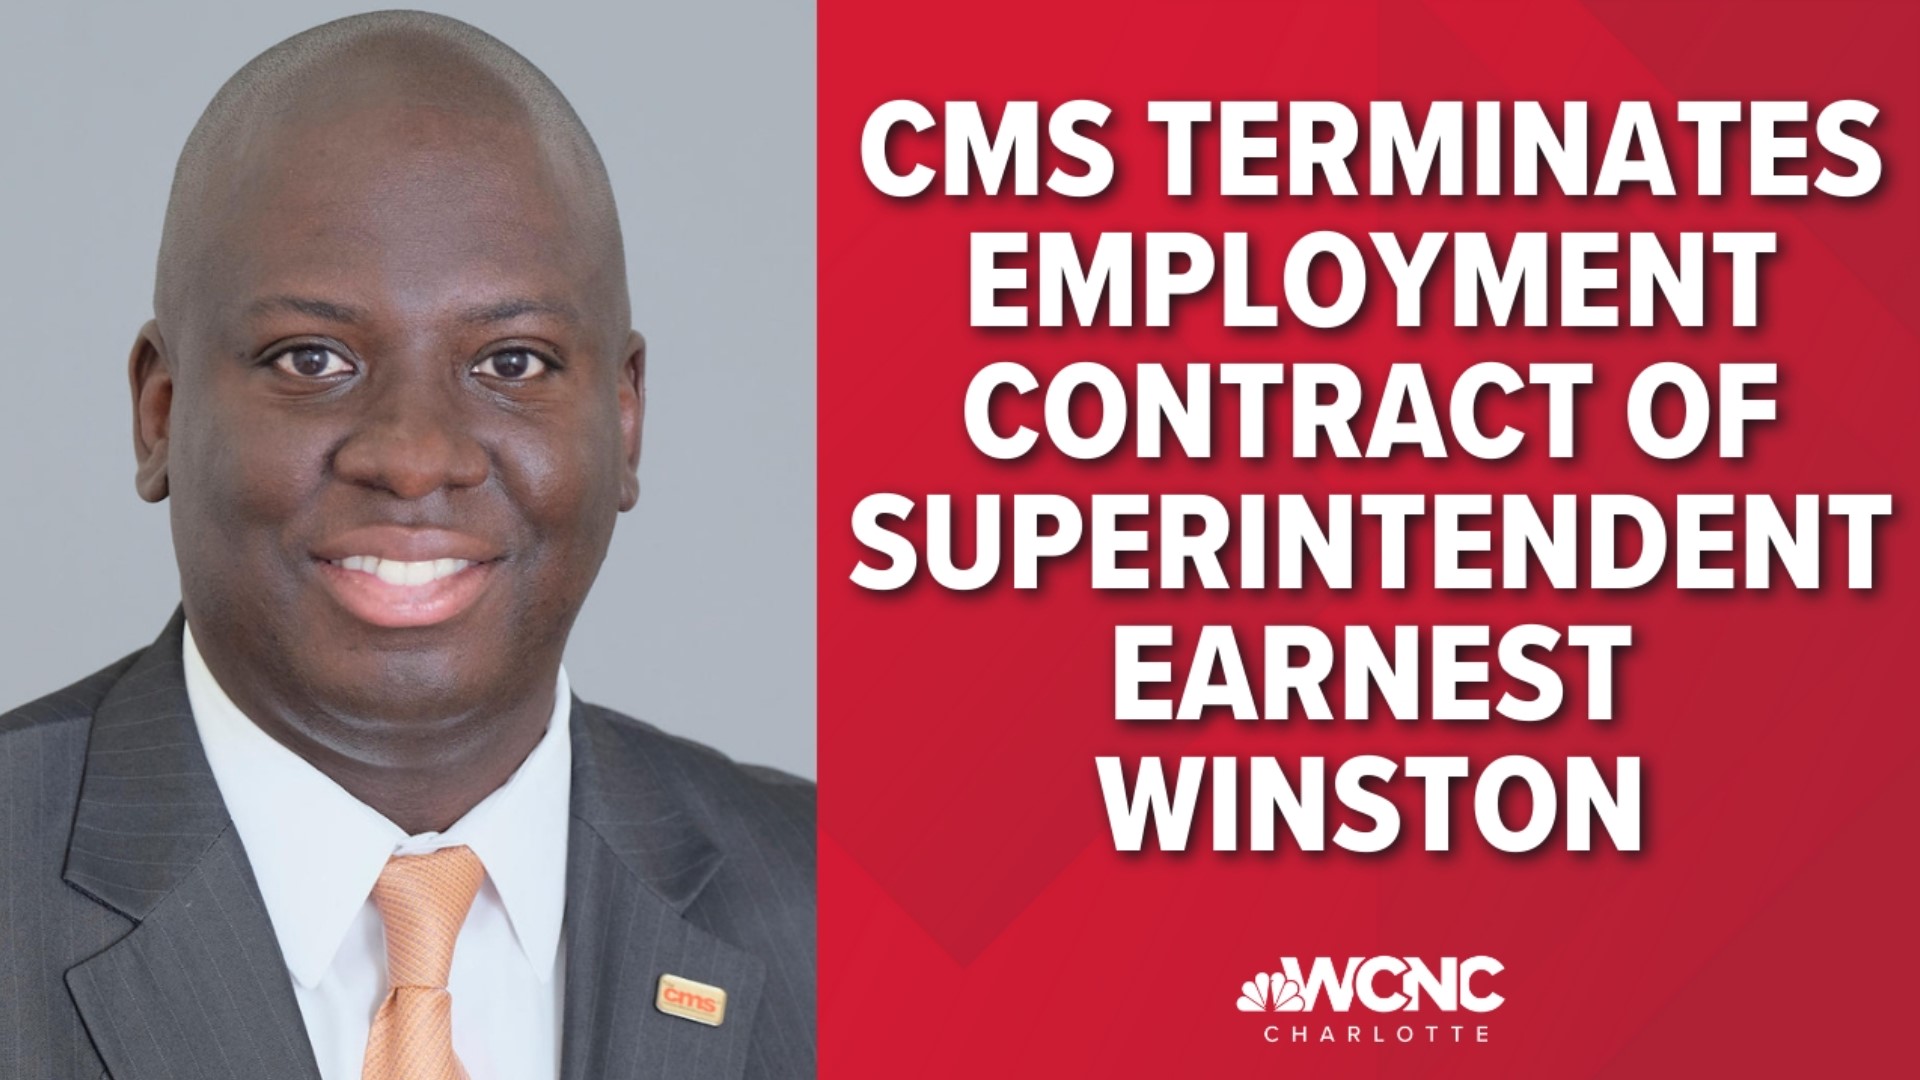 Board members voted 7-2 to terminate Winston's employment agreement. District 3's Dr. Ruby Jones and vice-chairperson Thelma Byers-Bailey voted against the motion.